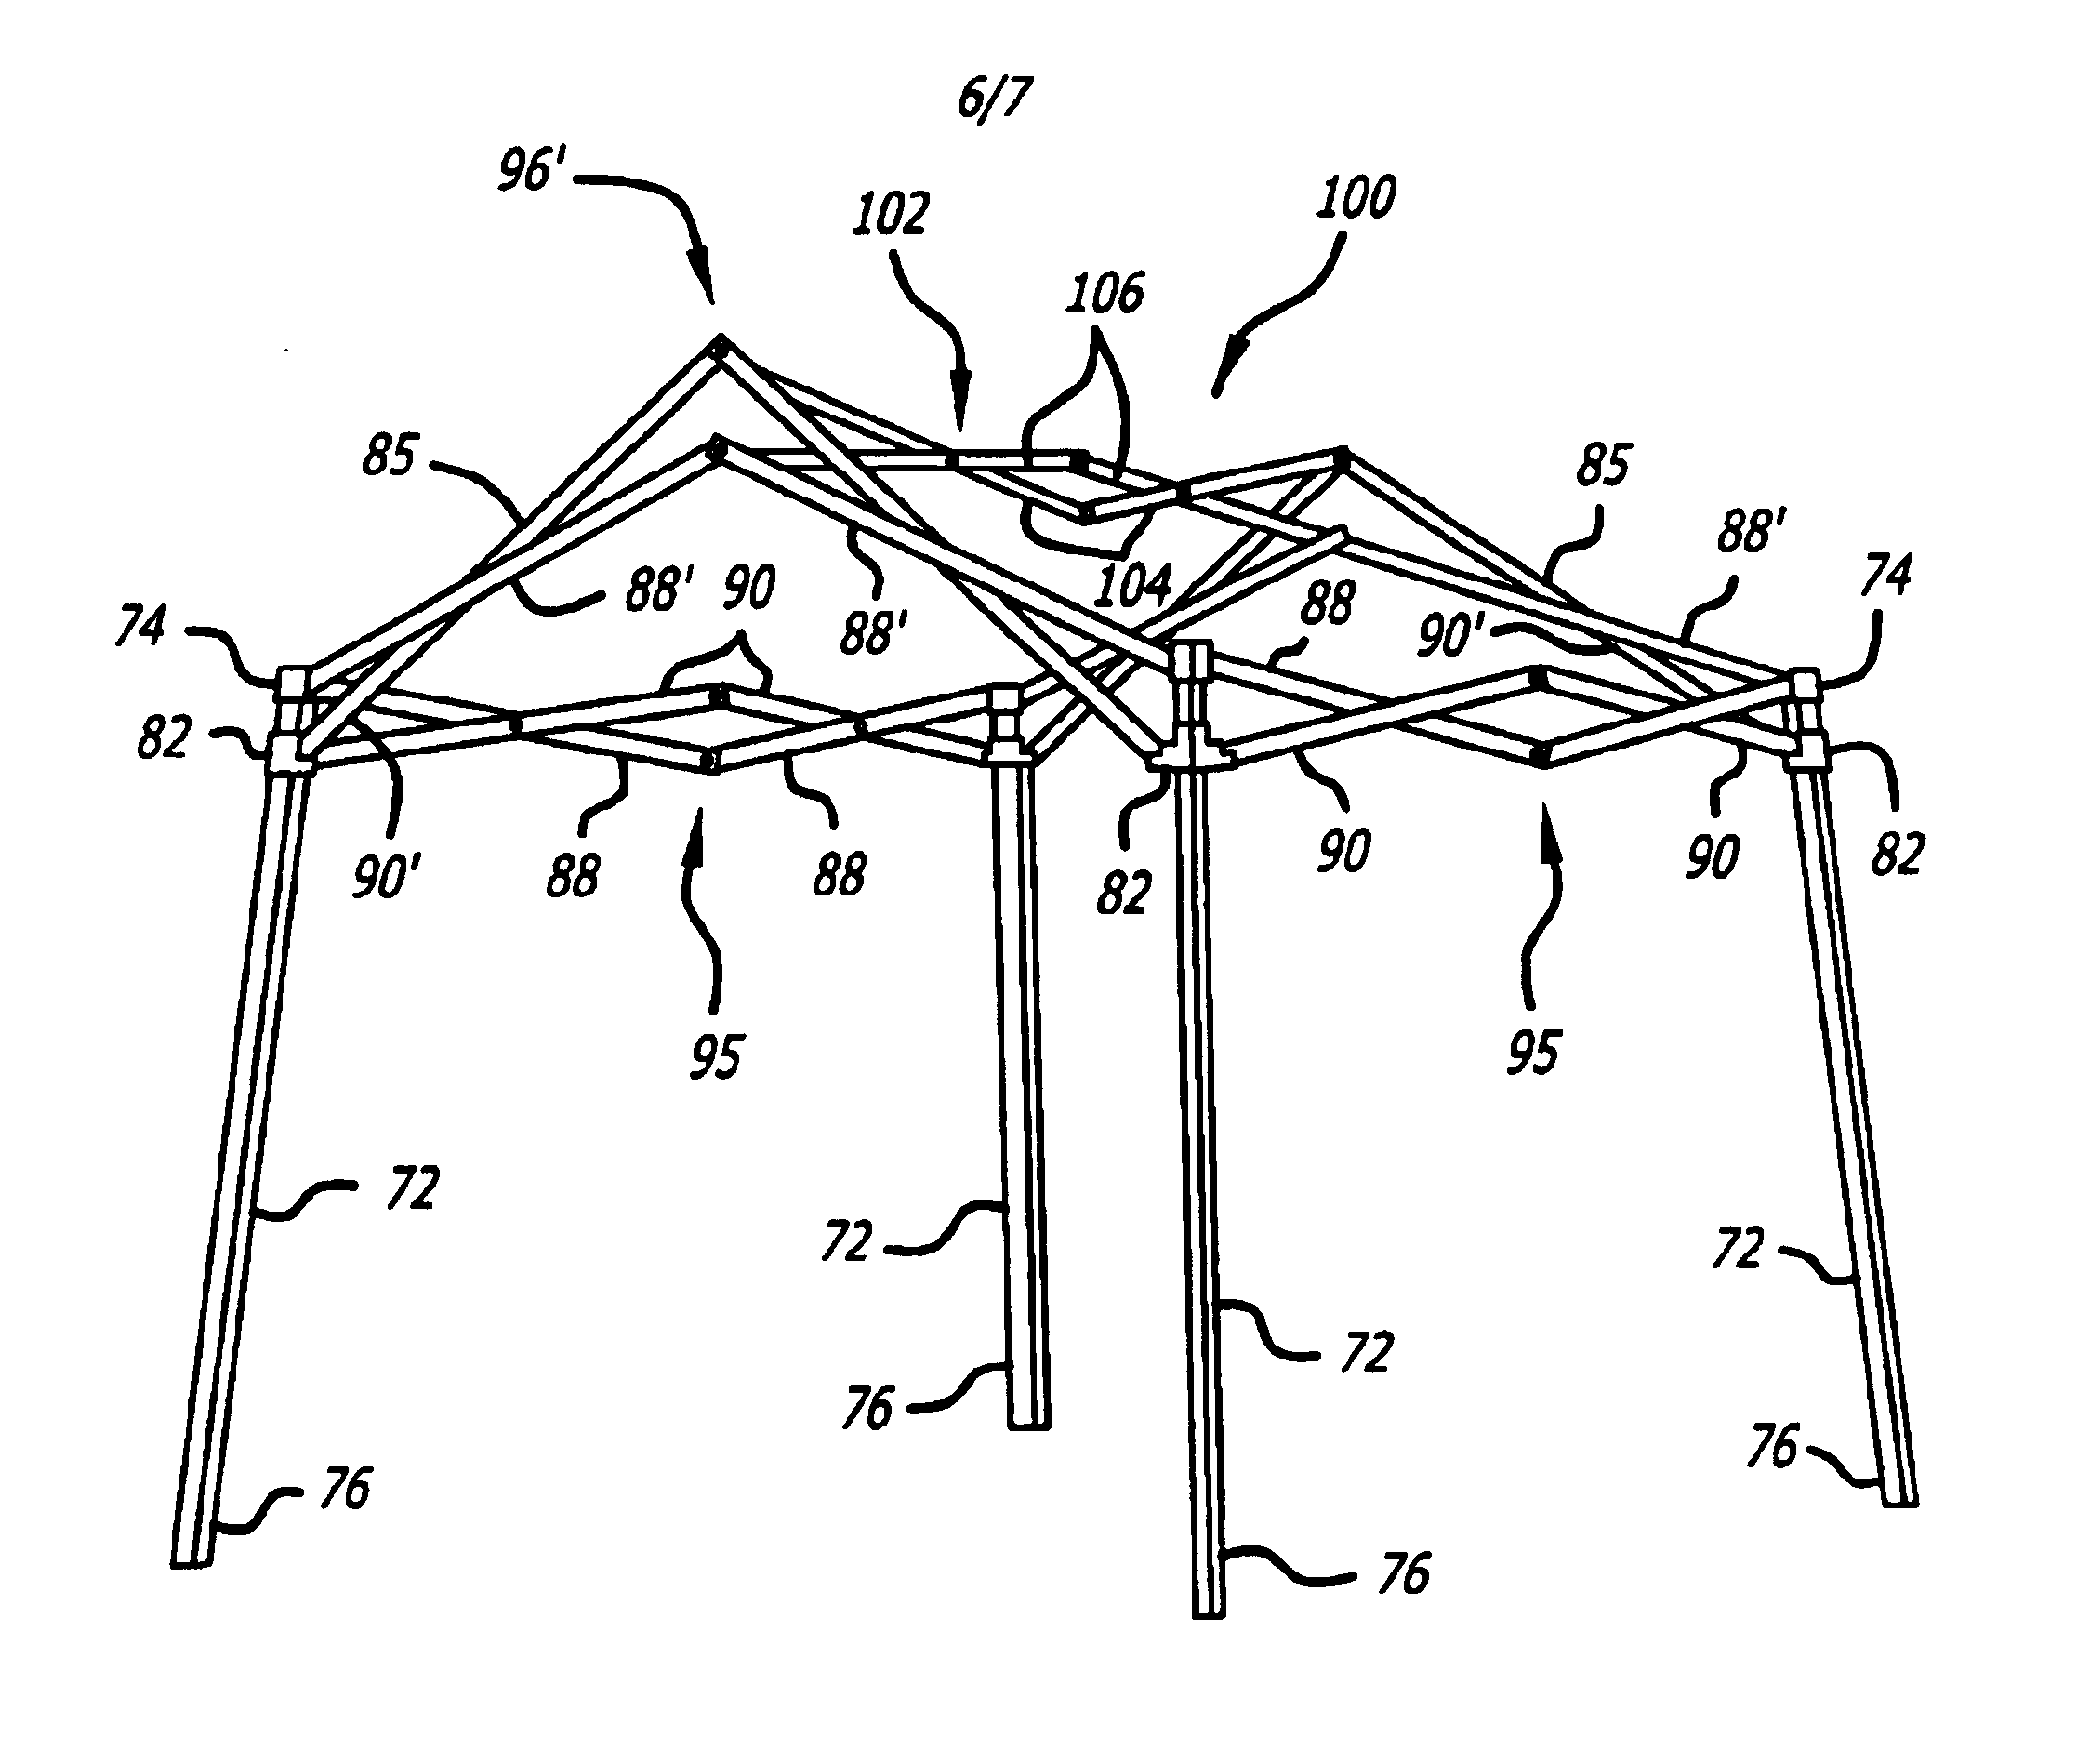 Erectable canopy with reinforced roof structure